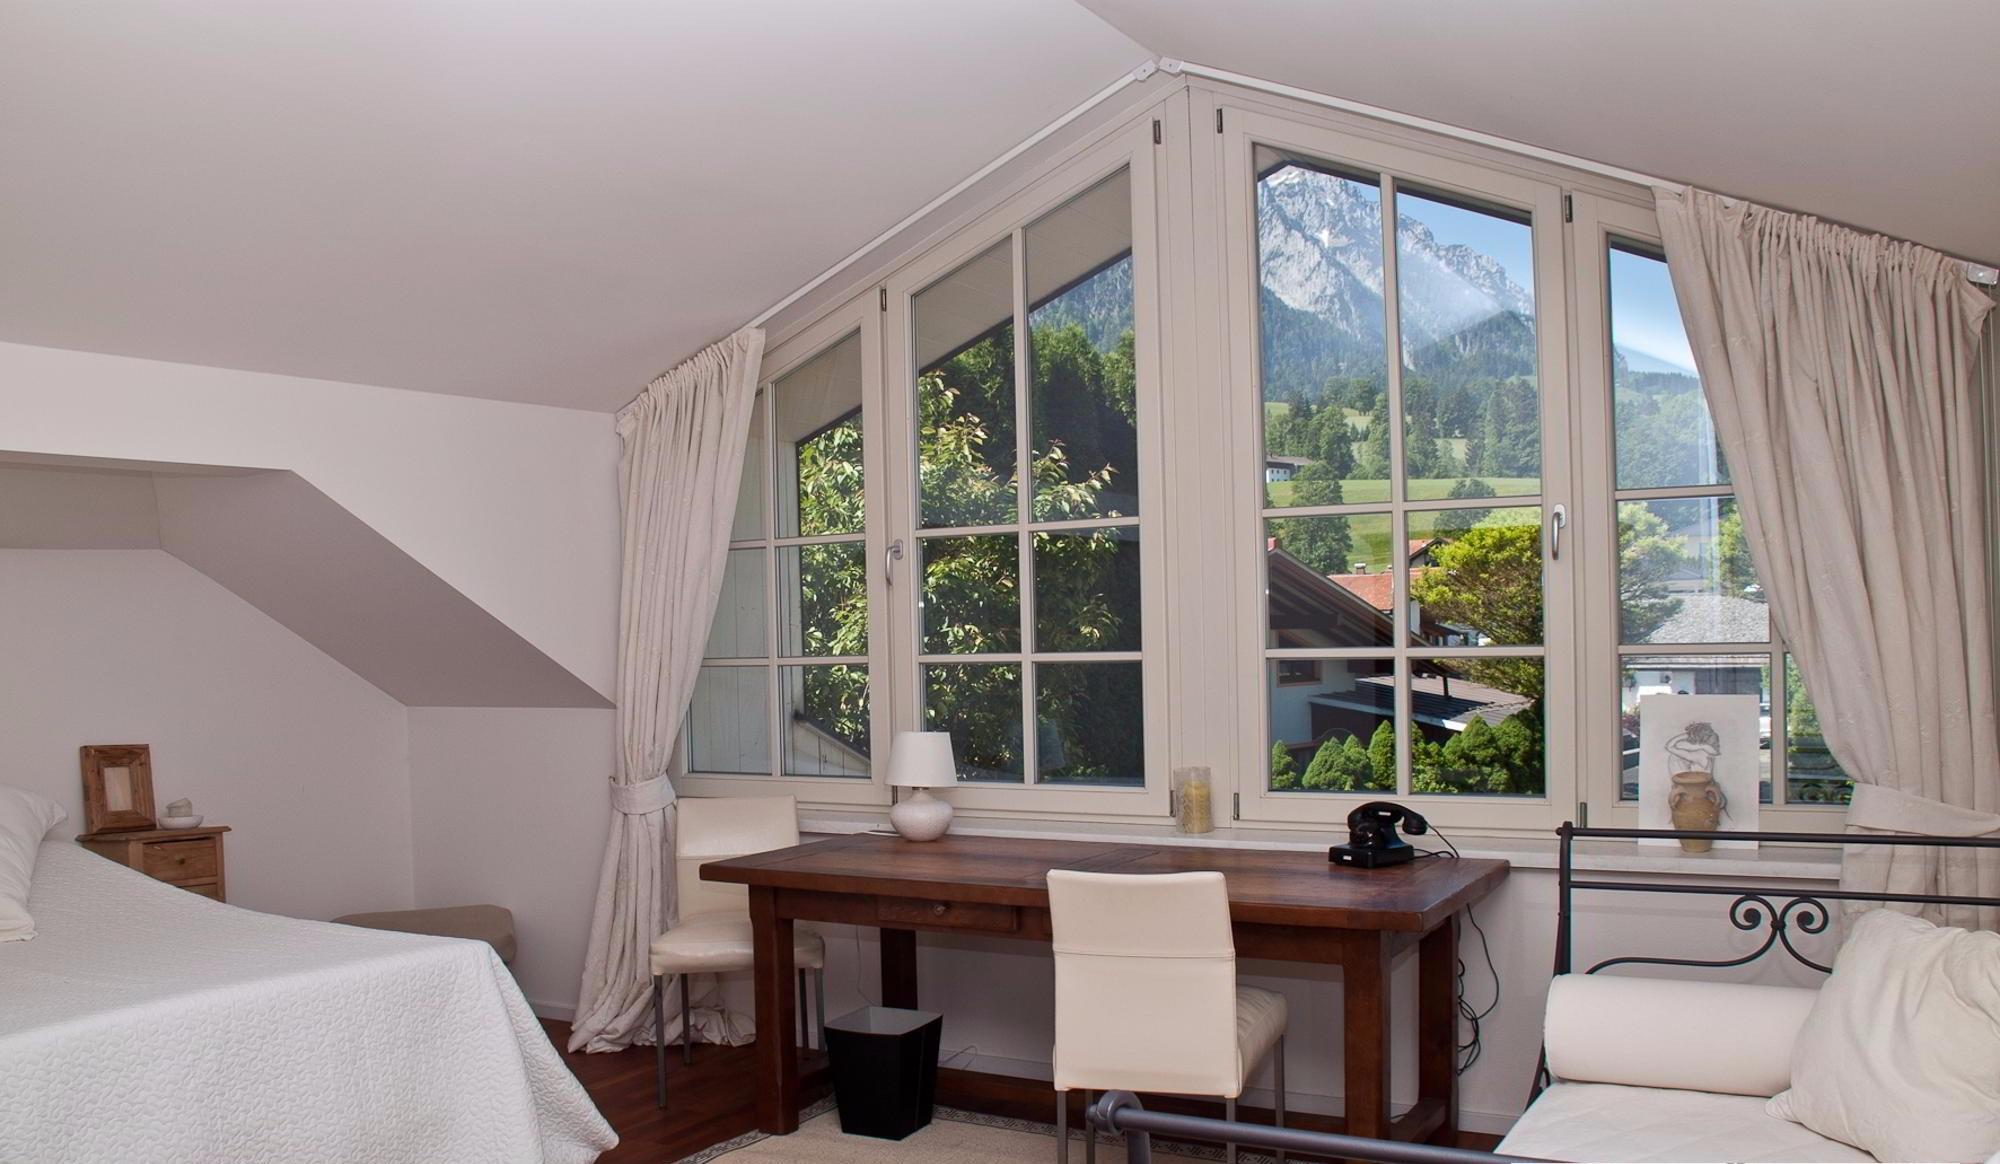 Comfortable country villa with a lake view in village of Walchsee